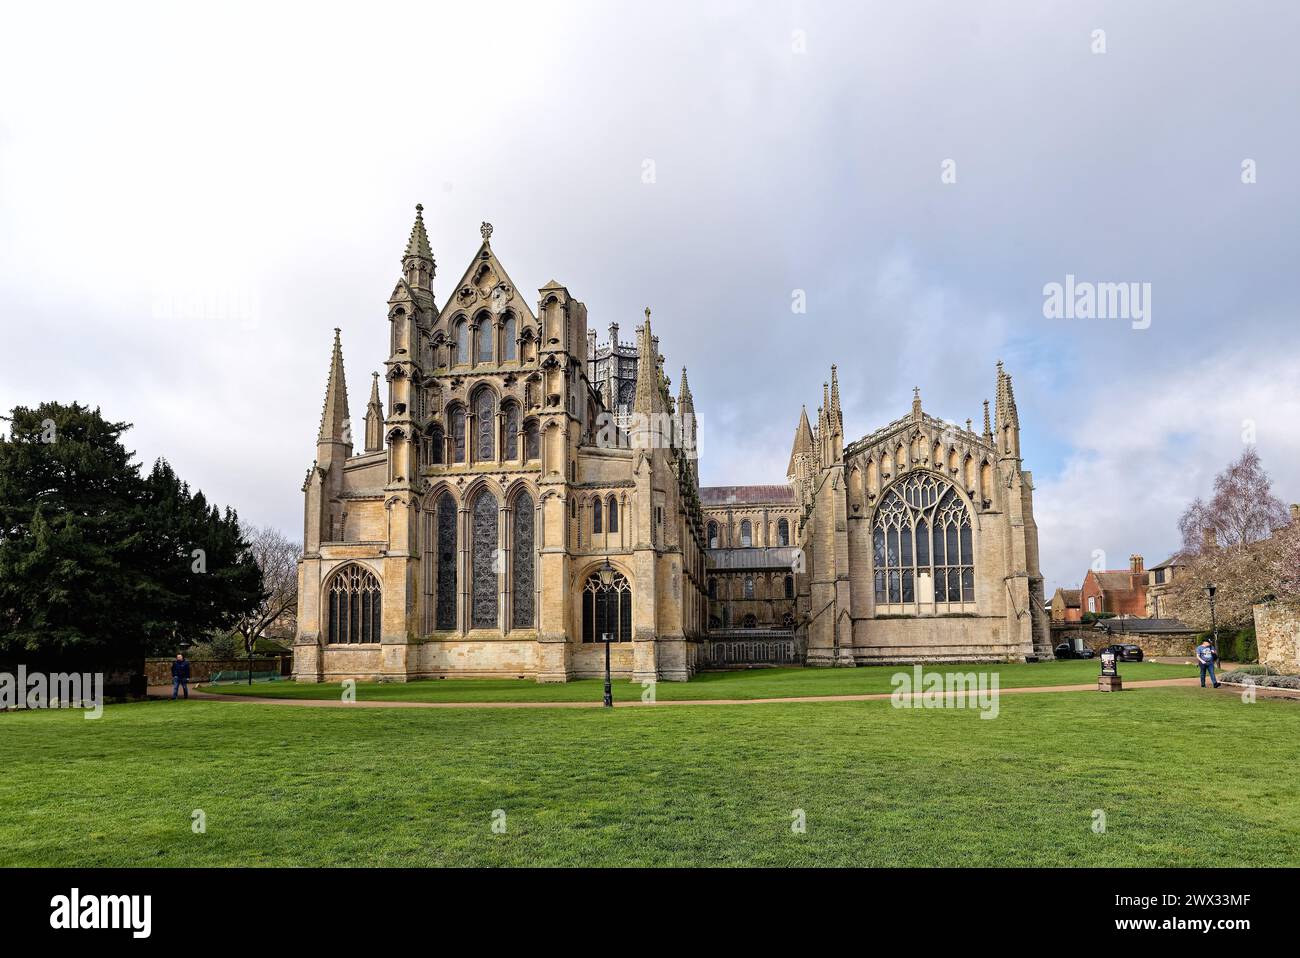 Exterior of the historic Ely cathedral on a sunny spring day Cambridgeshire England Great Britain UK Stock Photo